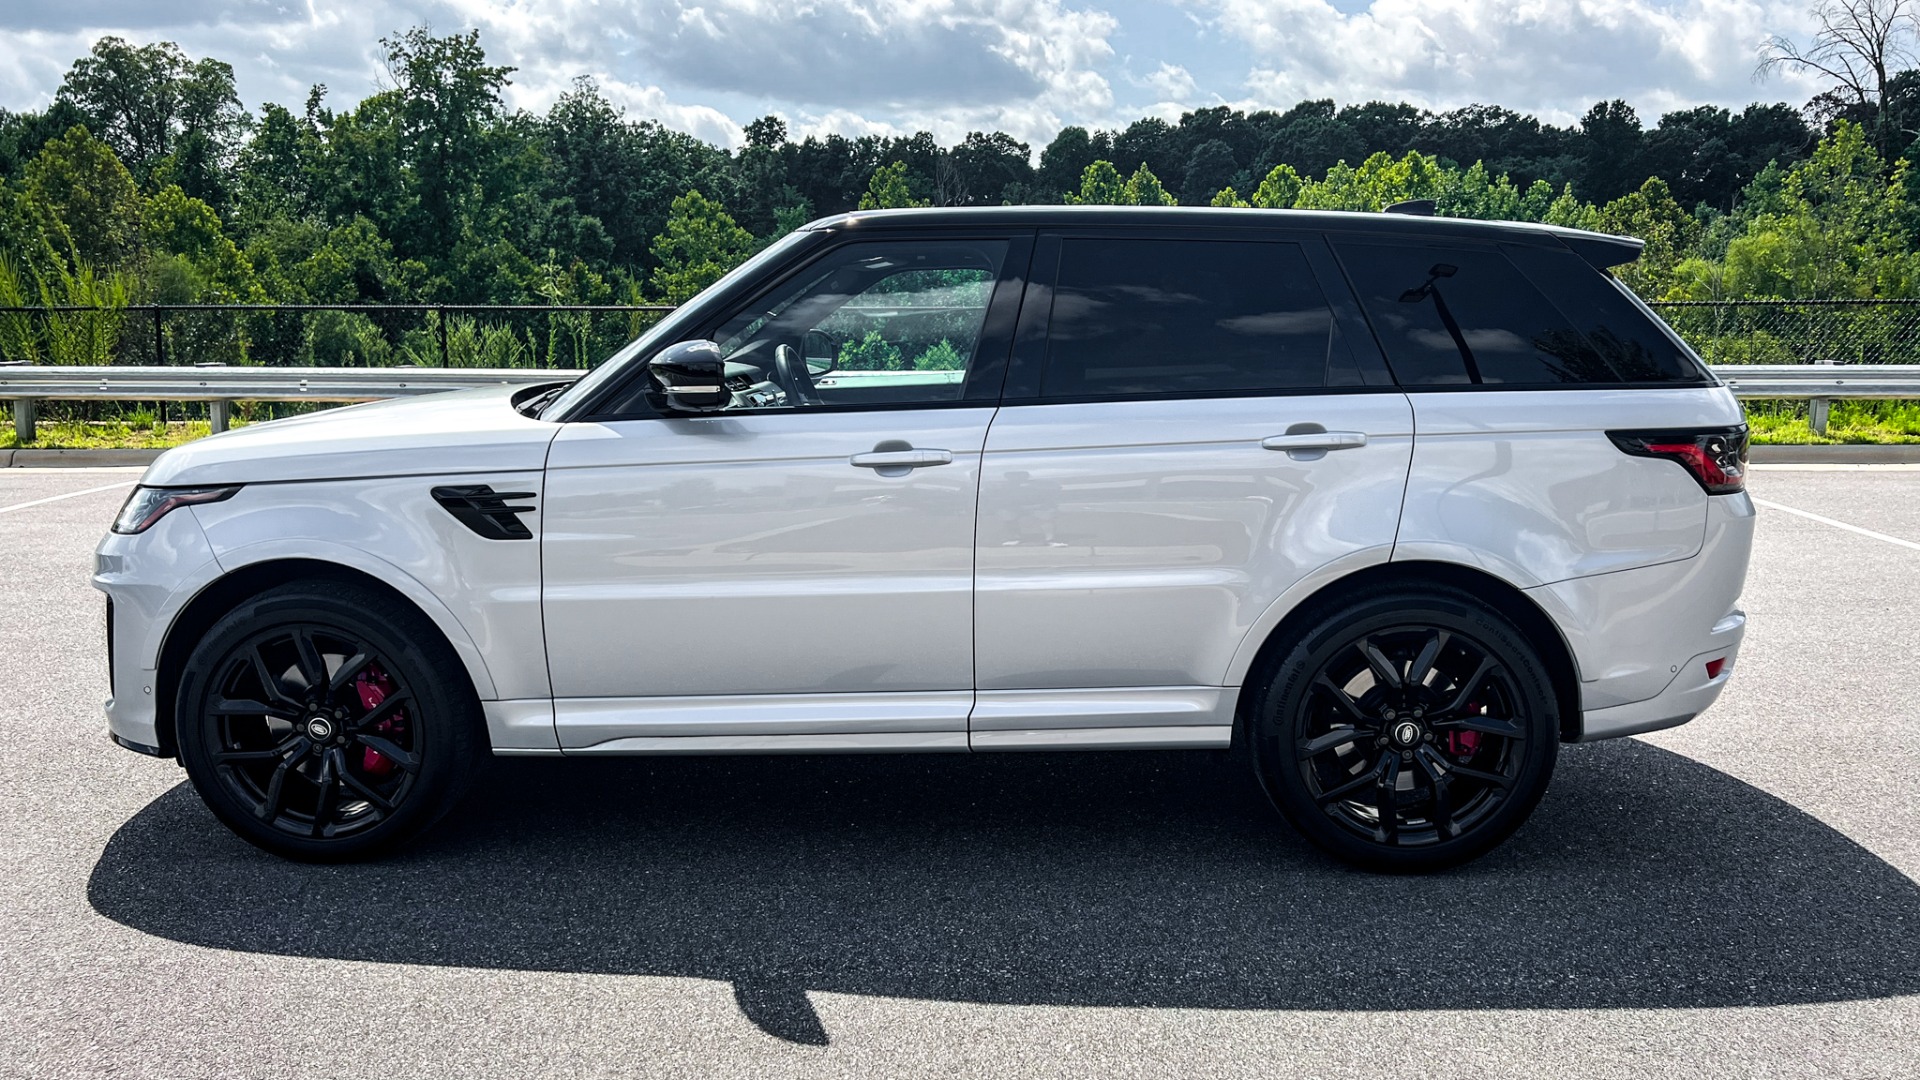 Used 2018 Land Rover Range Rover Sport SVR / SVO ULTRA METALLIC PAINT / MERIDIAN SIGNATURE / 22IN WHEELS for sale Sold at Formula Imports in Charlotte NC 28227 8